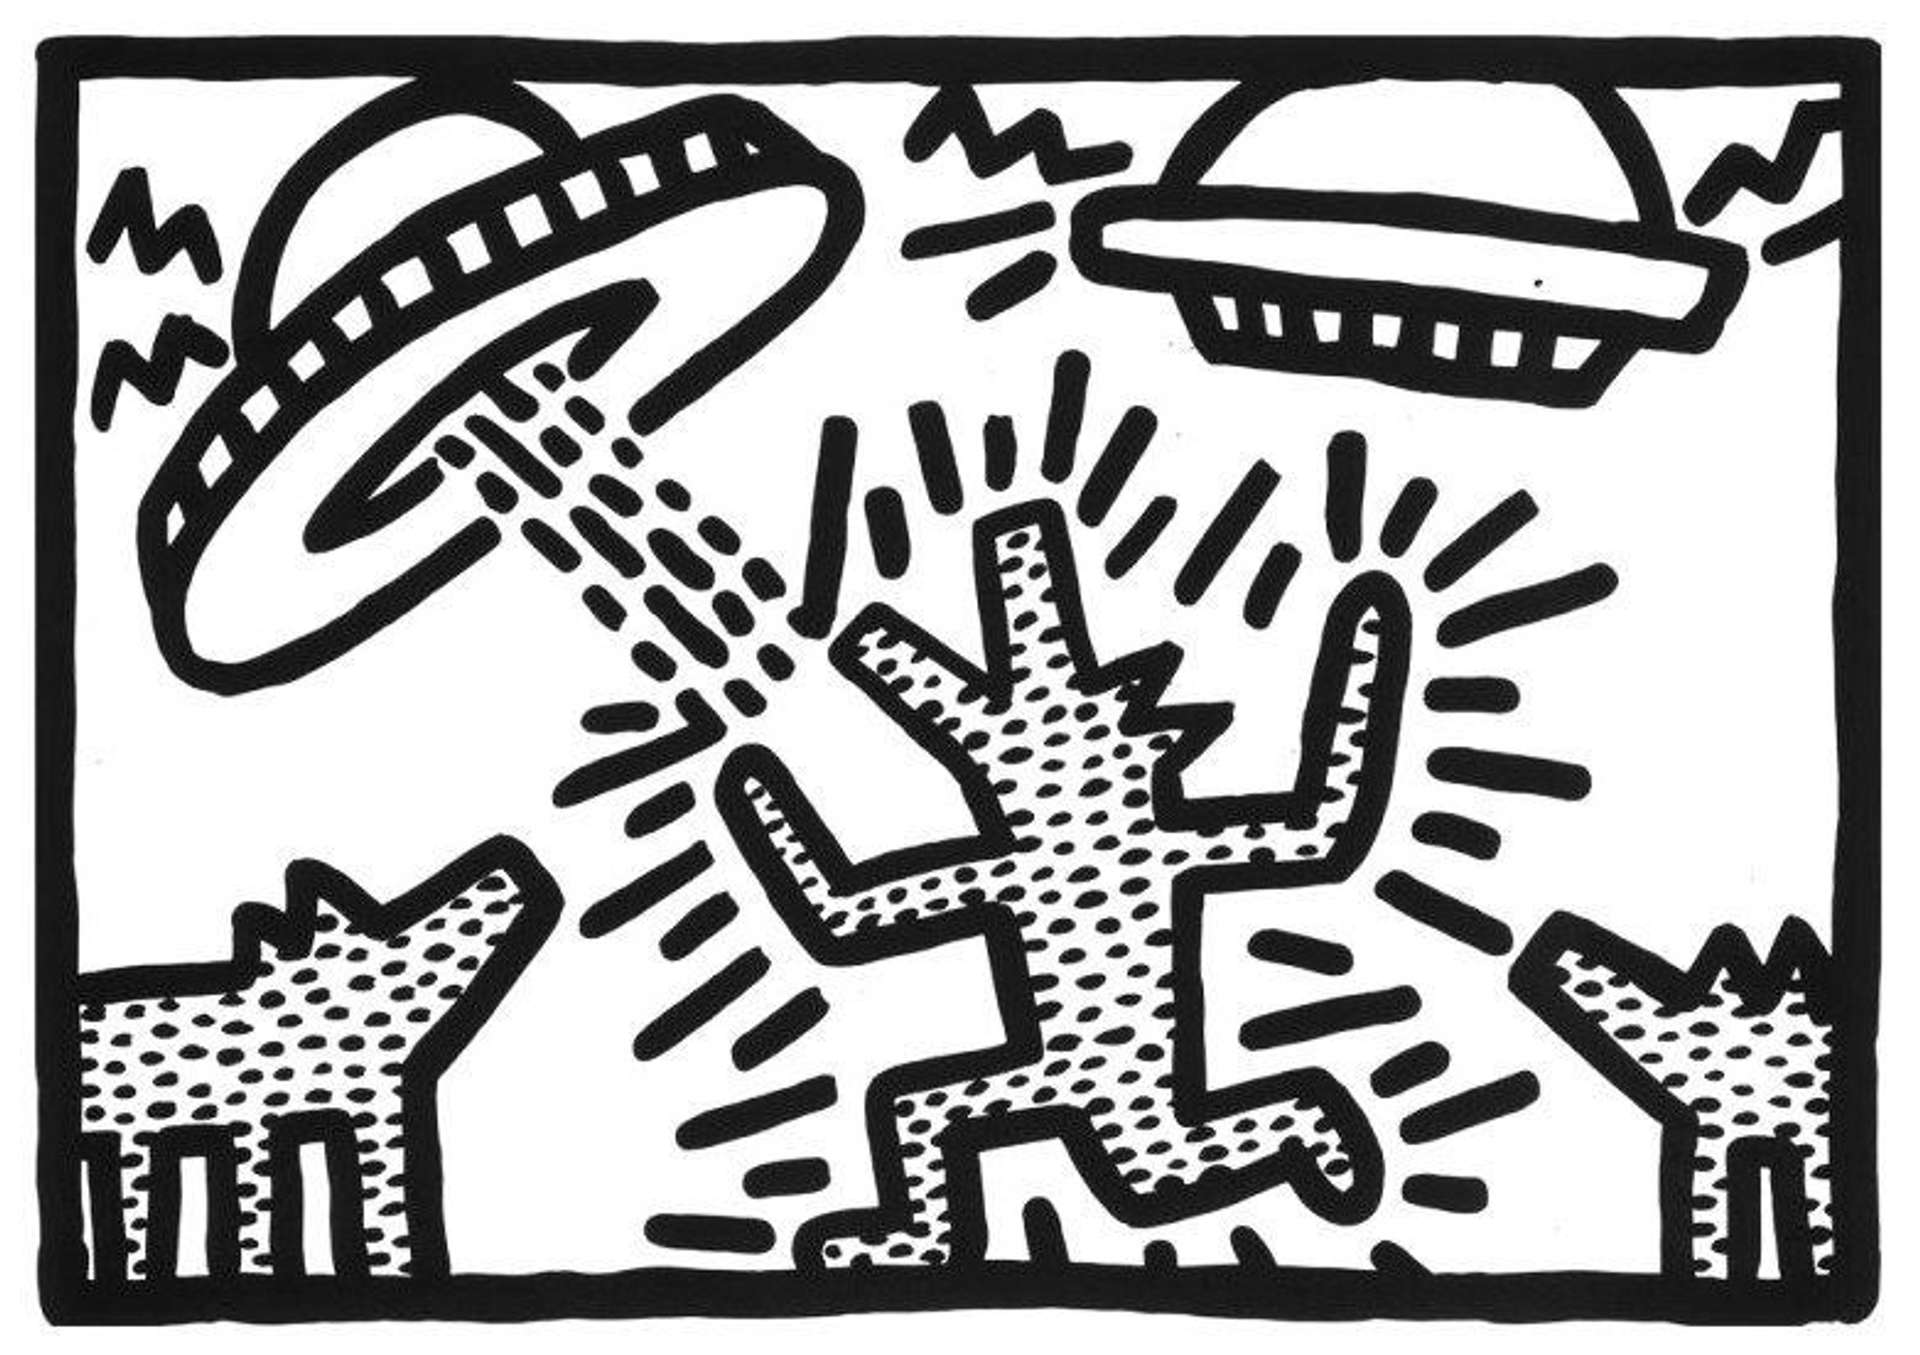 Untitled (Dogs With Ufos) by Keith Haring